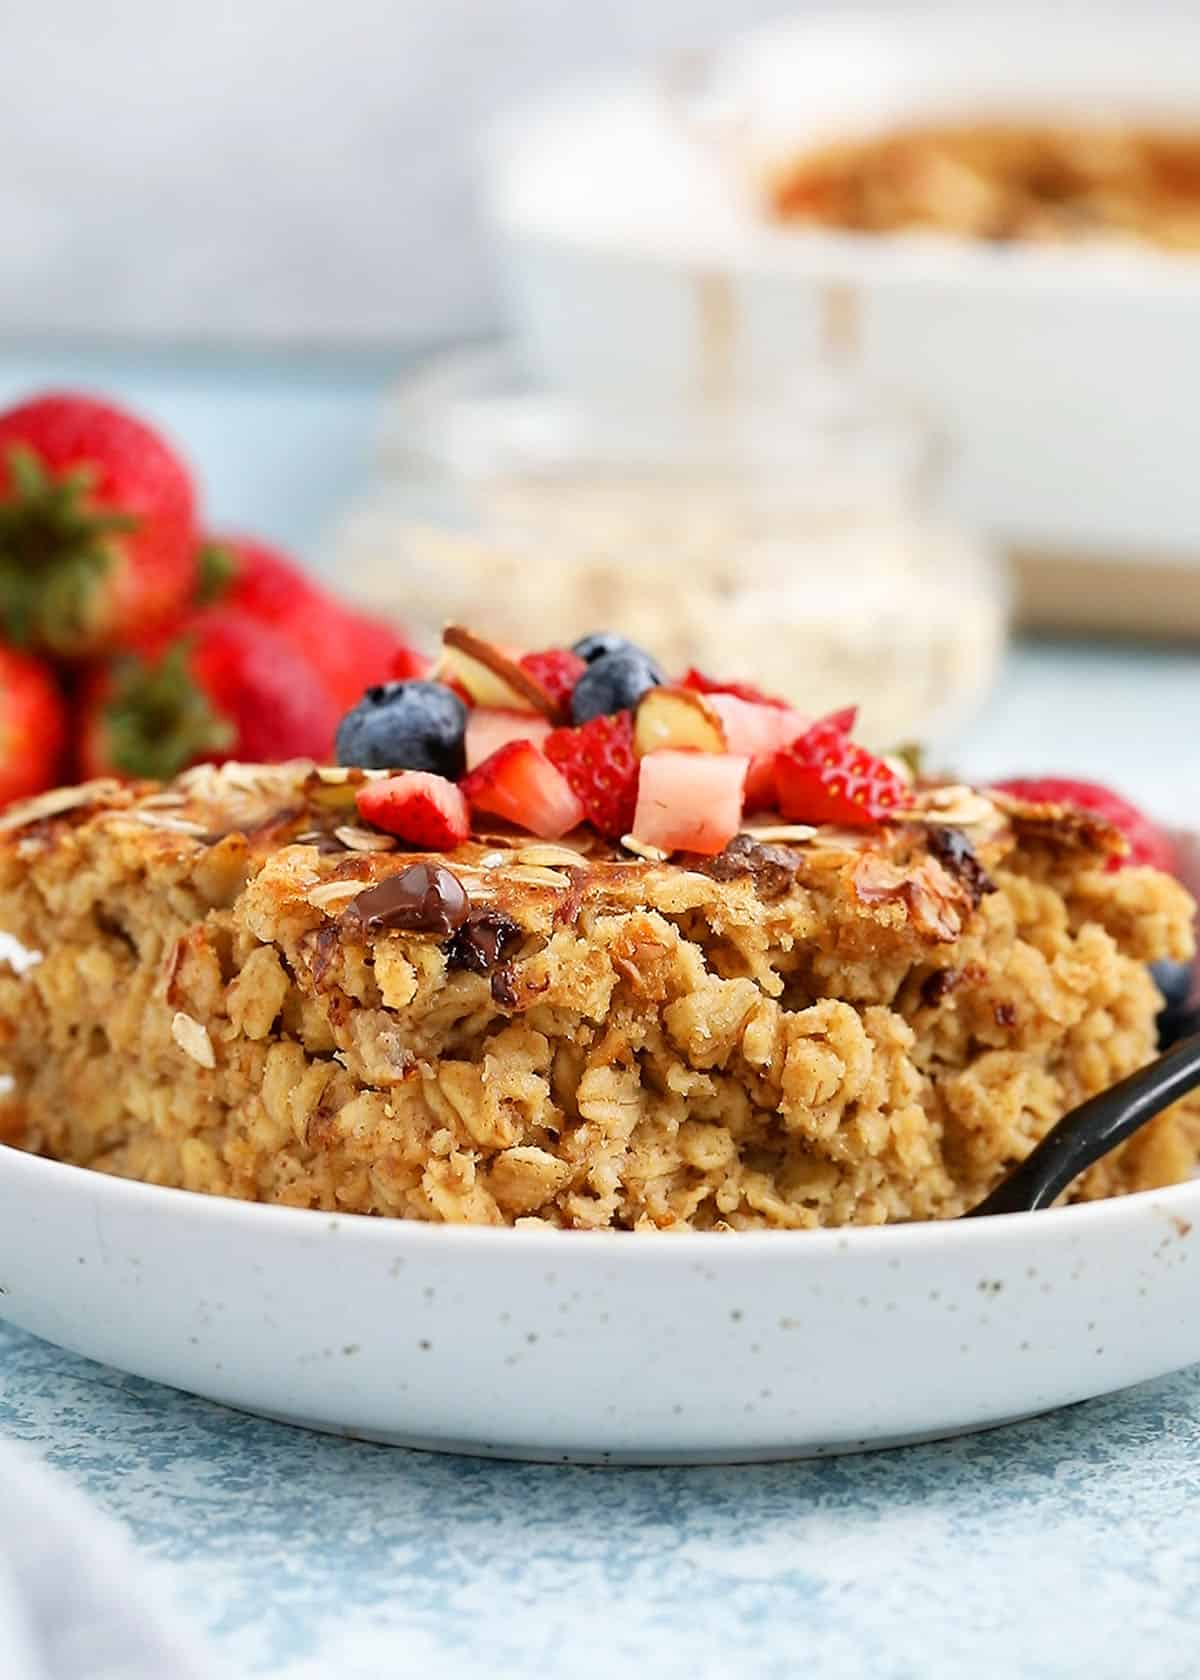 one square piece of baked oatmeal topped with berries in a white plate along with a black spoon.